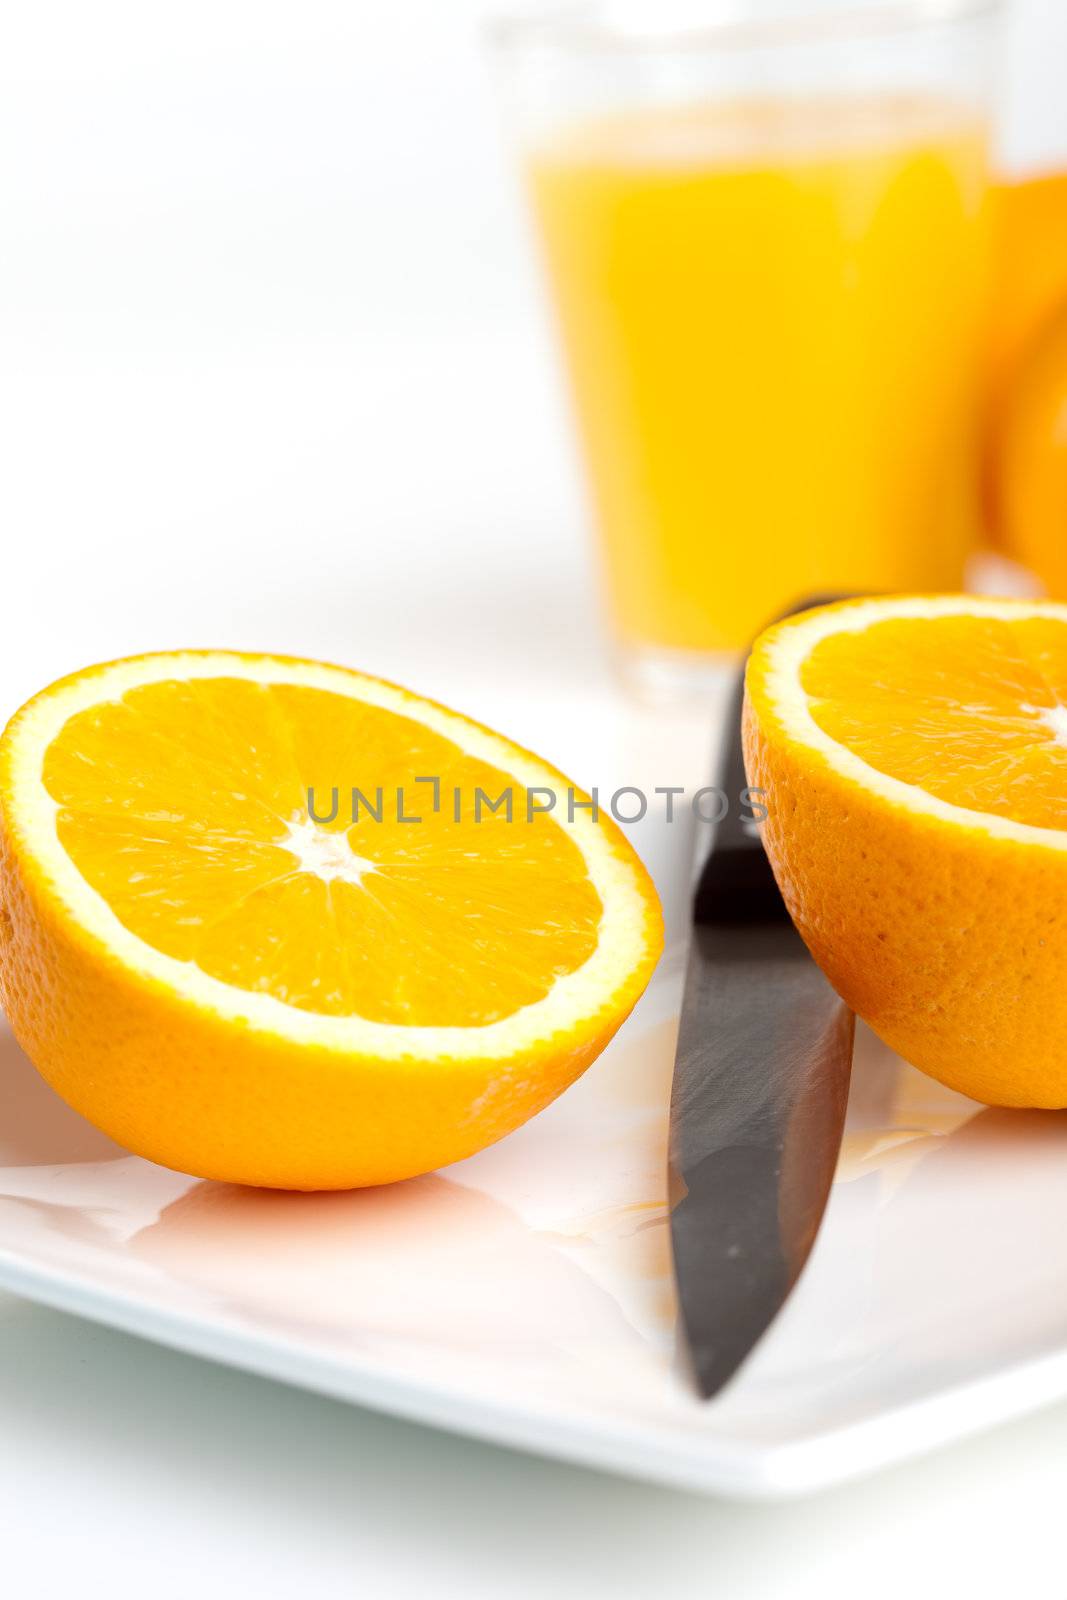 Orange cut into two halves with knife on a plate